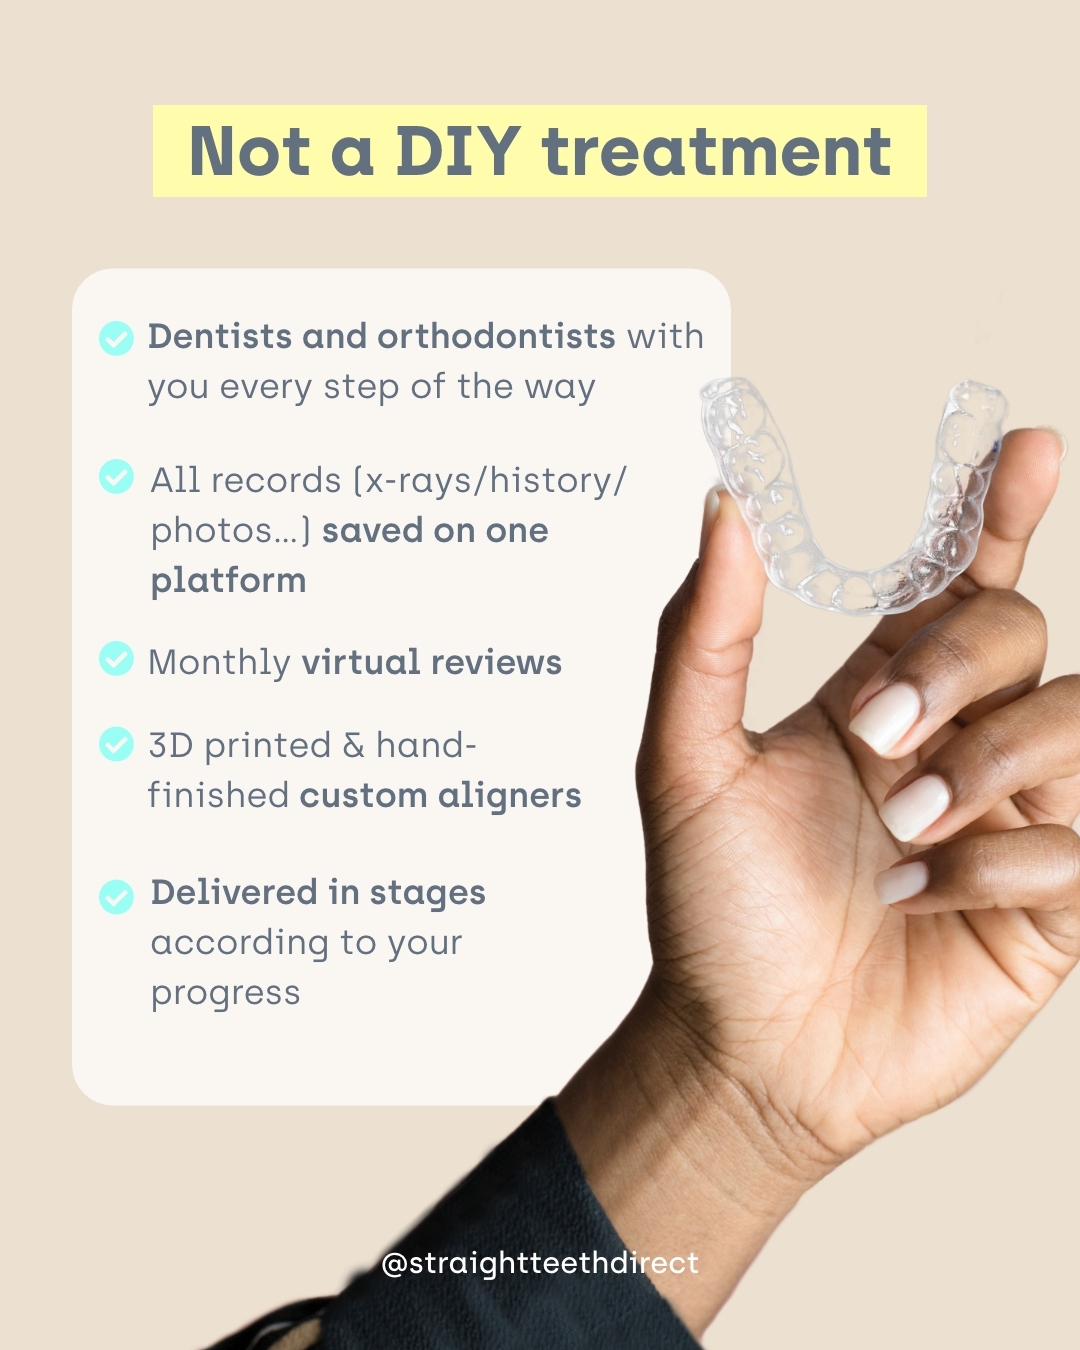 Straight Teeth Direct clear aligners are not DYI